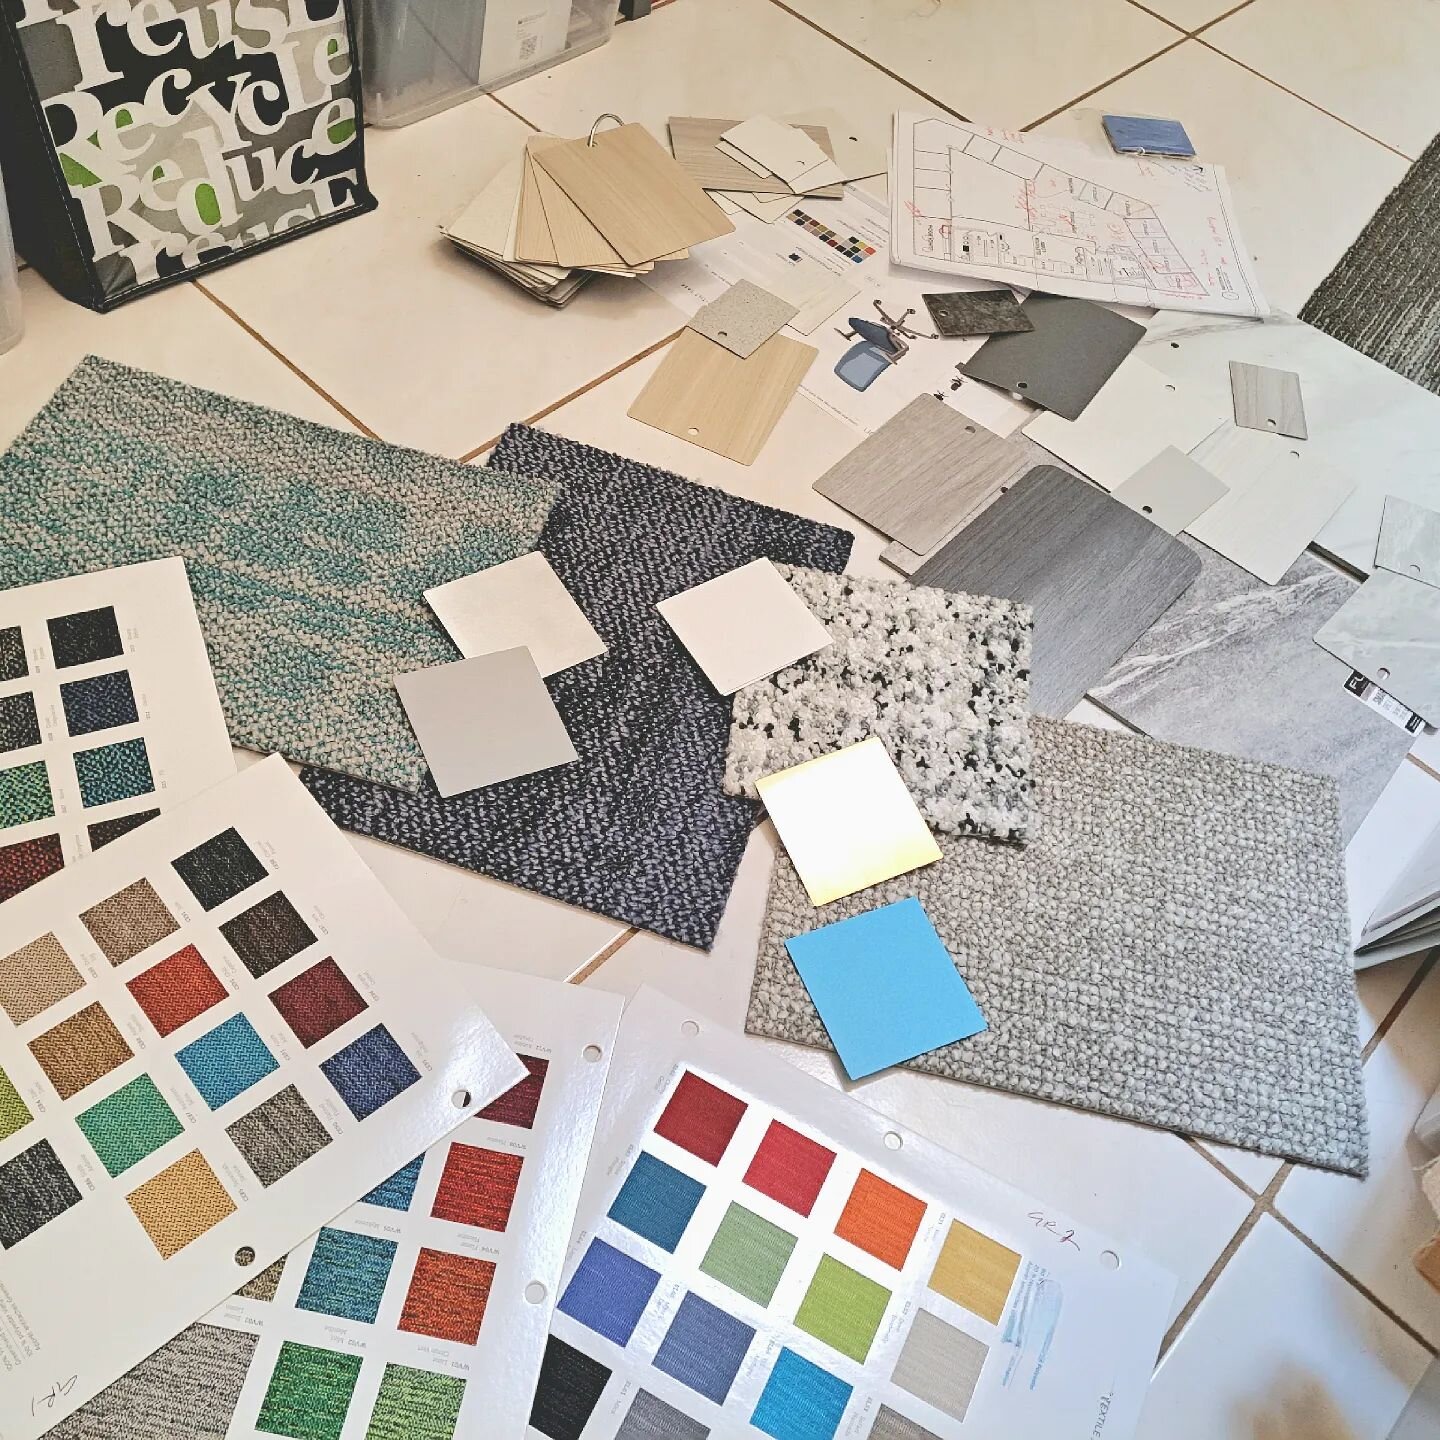 🎨 We promise this chaos is part of the process. One of the most exciting parts of this conceptual phase is finding out what components fit best with our clients' needs, wants, and must-haves. There are so many variables to creating your best project